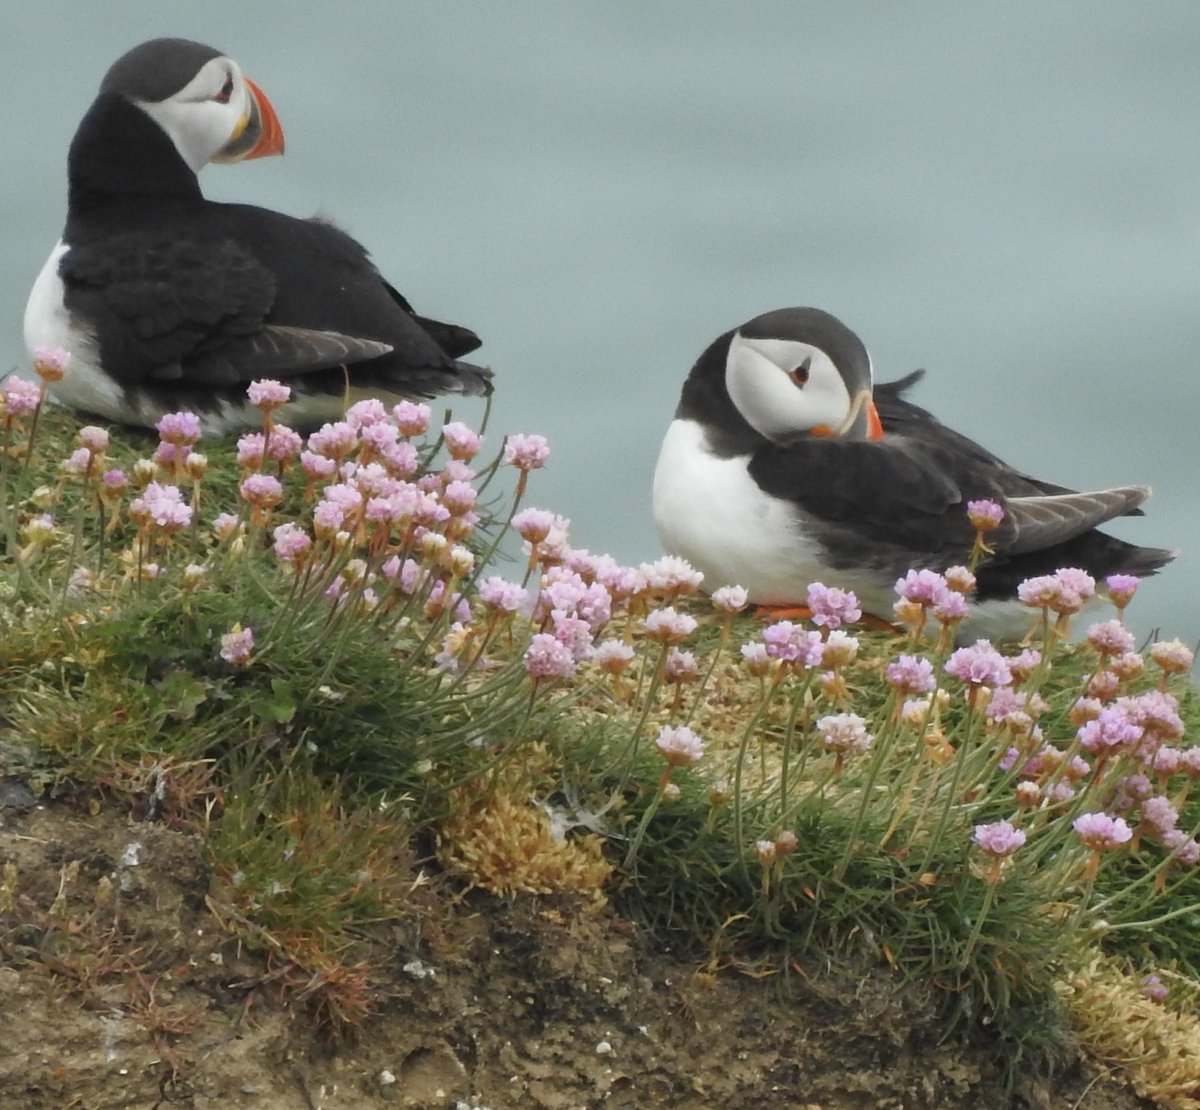 More Puffins anyone?😀